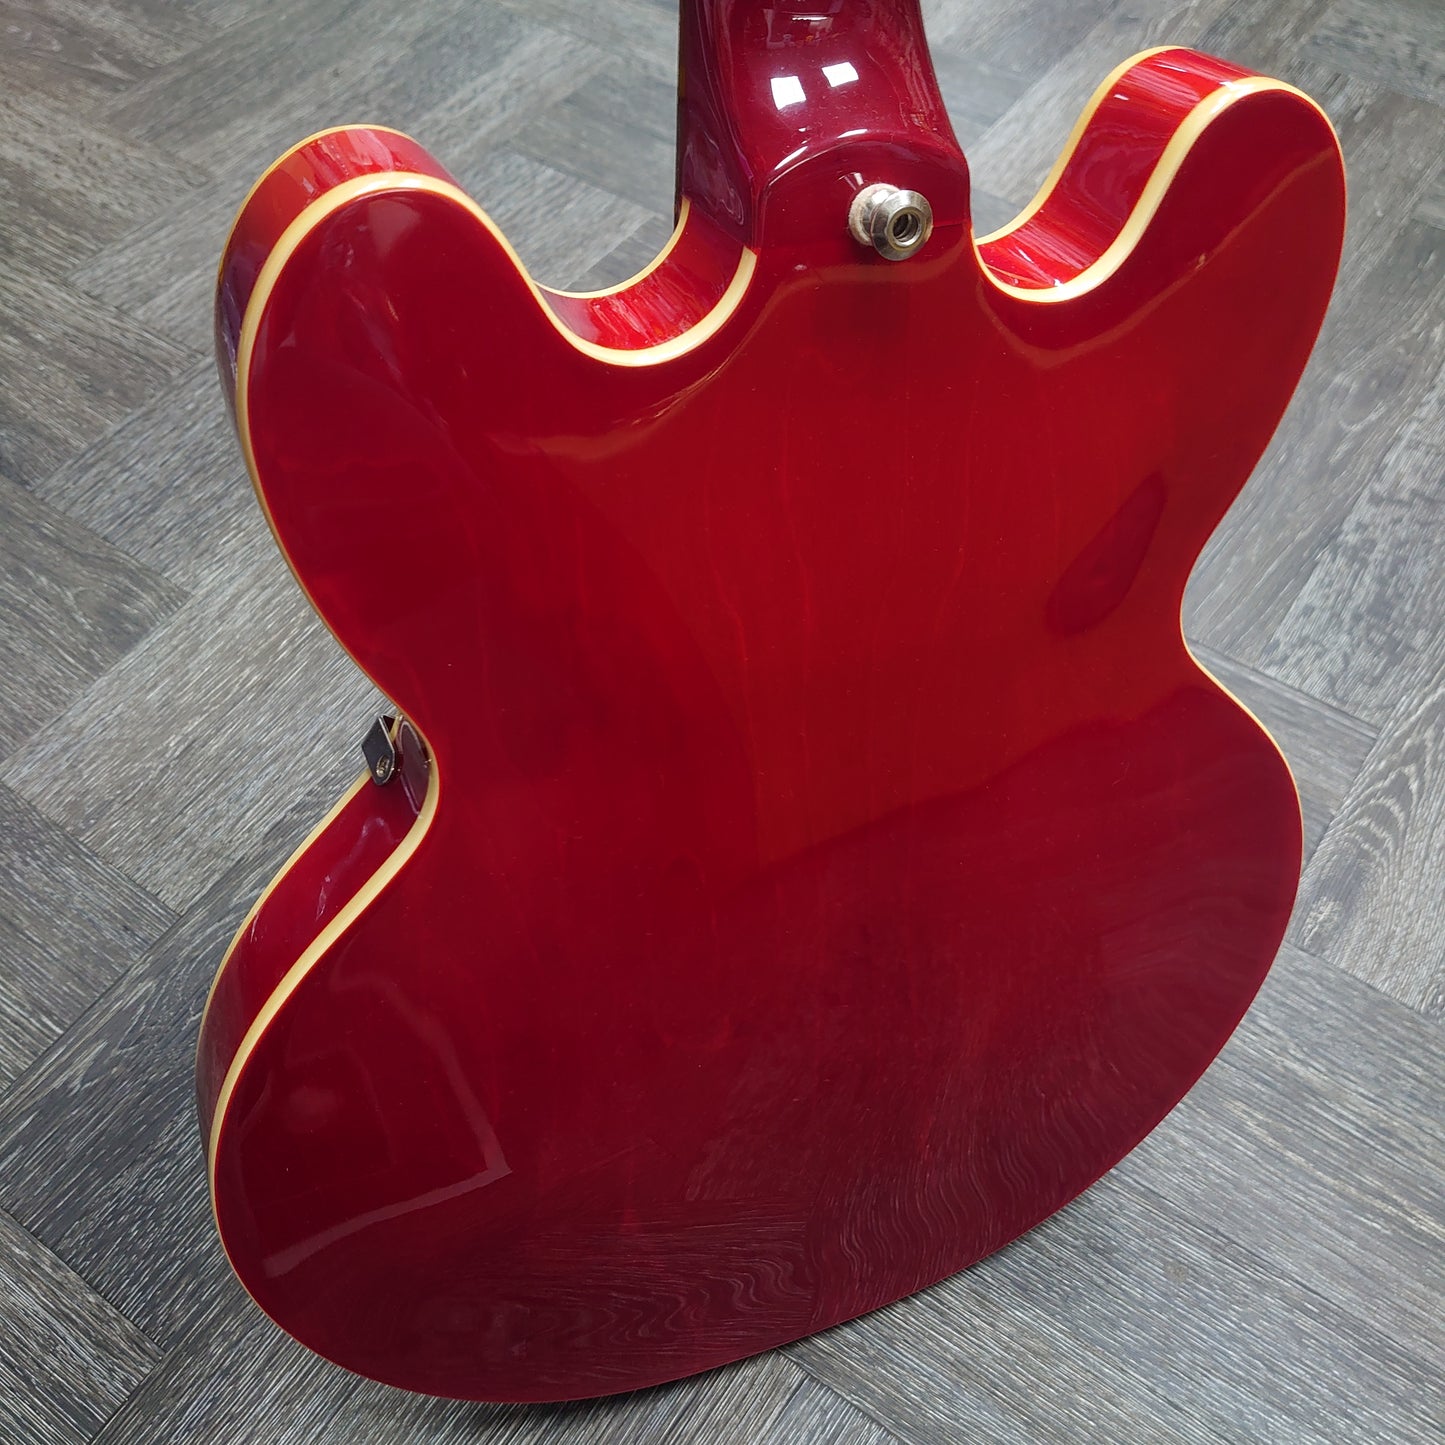 Epiphone Dot - Cherry Red [2010]